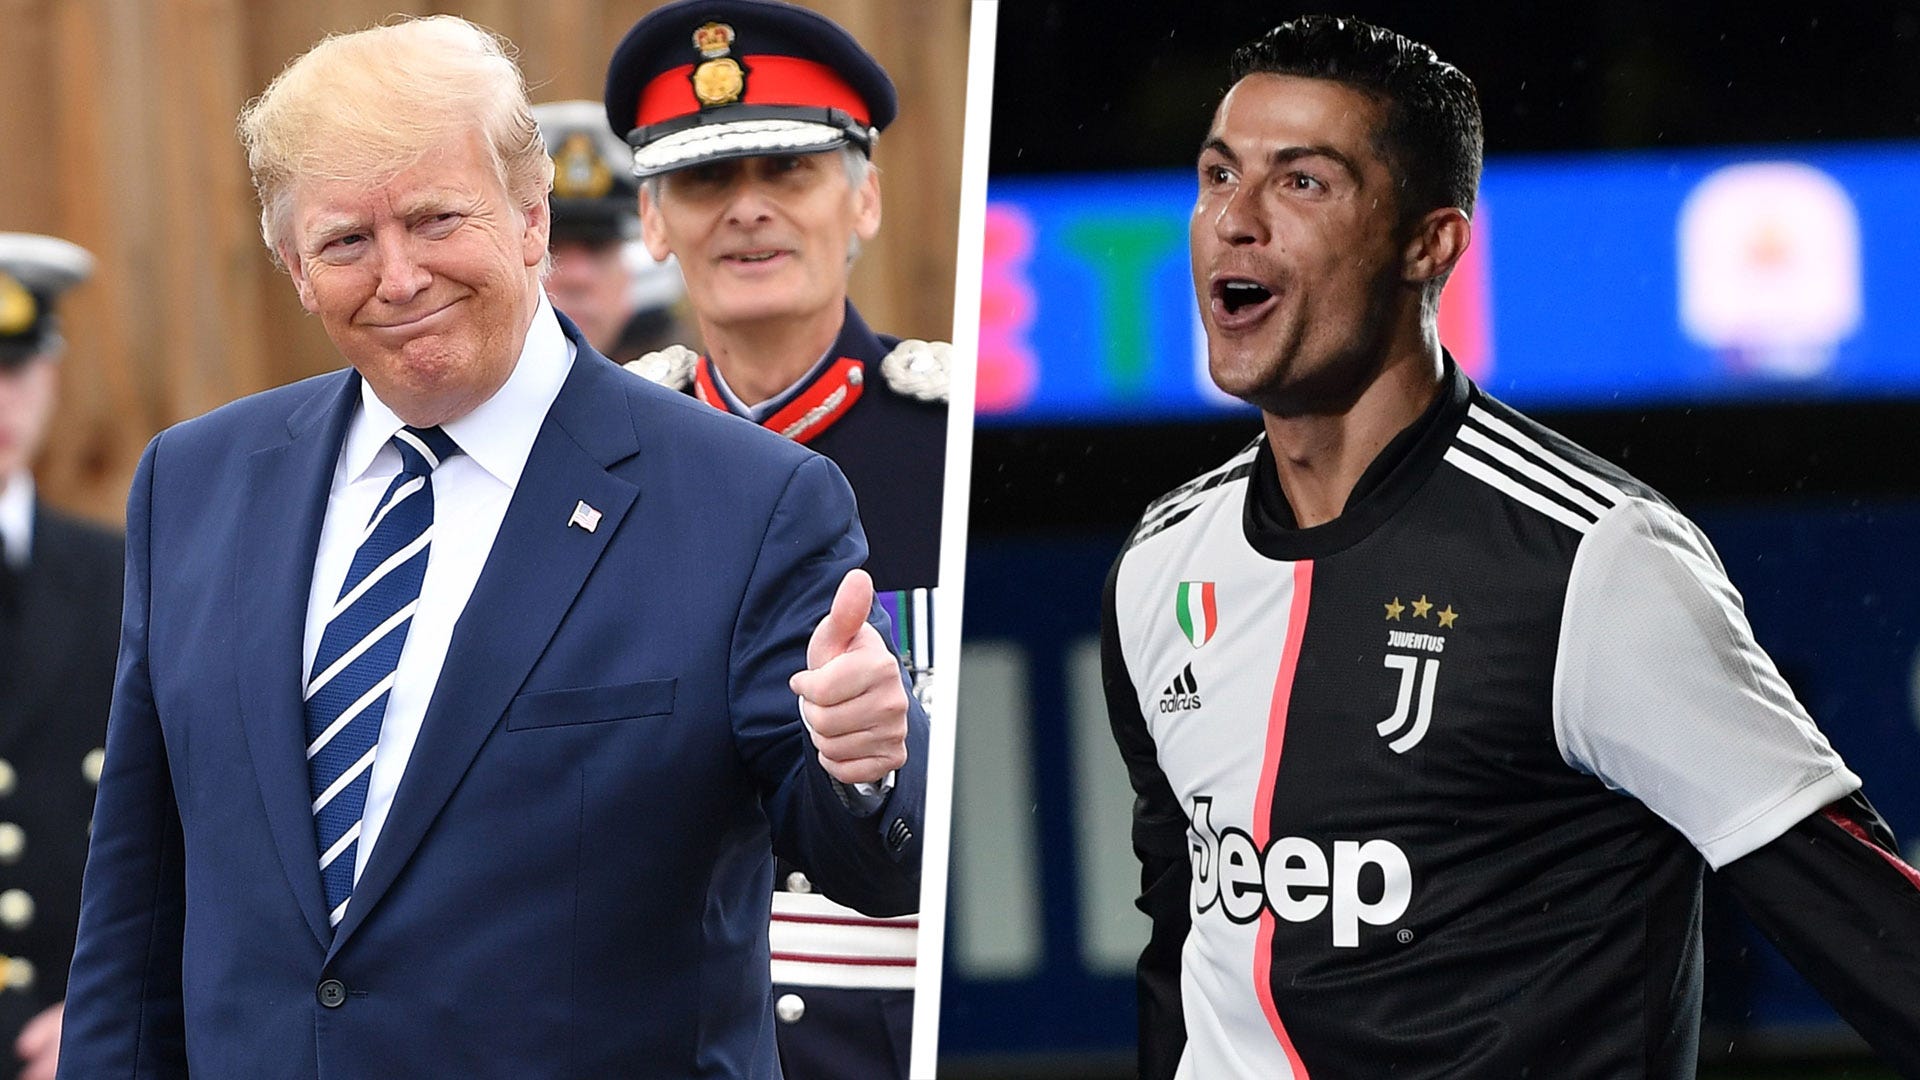 Cristiano Ronaldo draws hundreds of thousands of people!' - US president  Donald Trump weighs in on football's gender pay gap | Goal.com